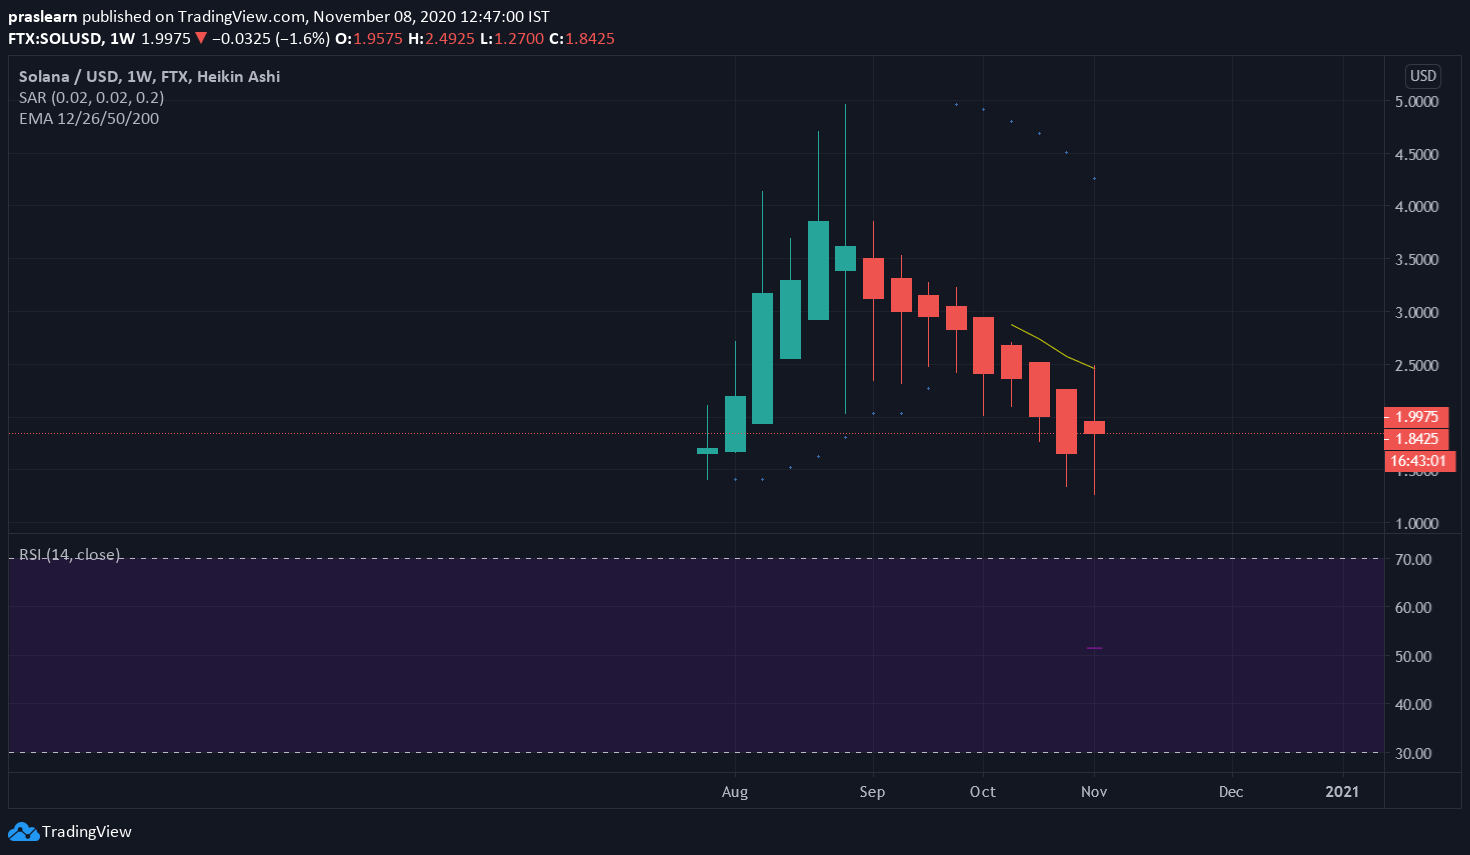 SOL/USD Weekly Chart: Tradingview